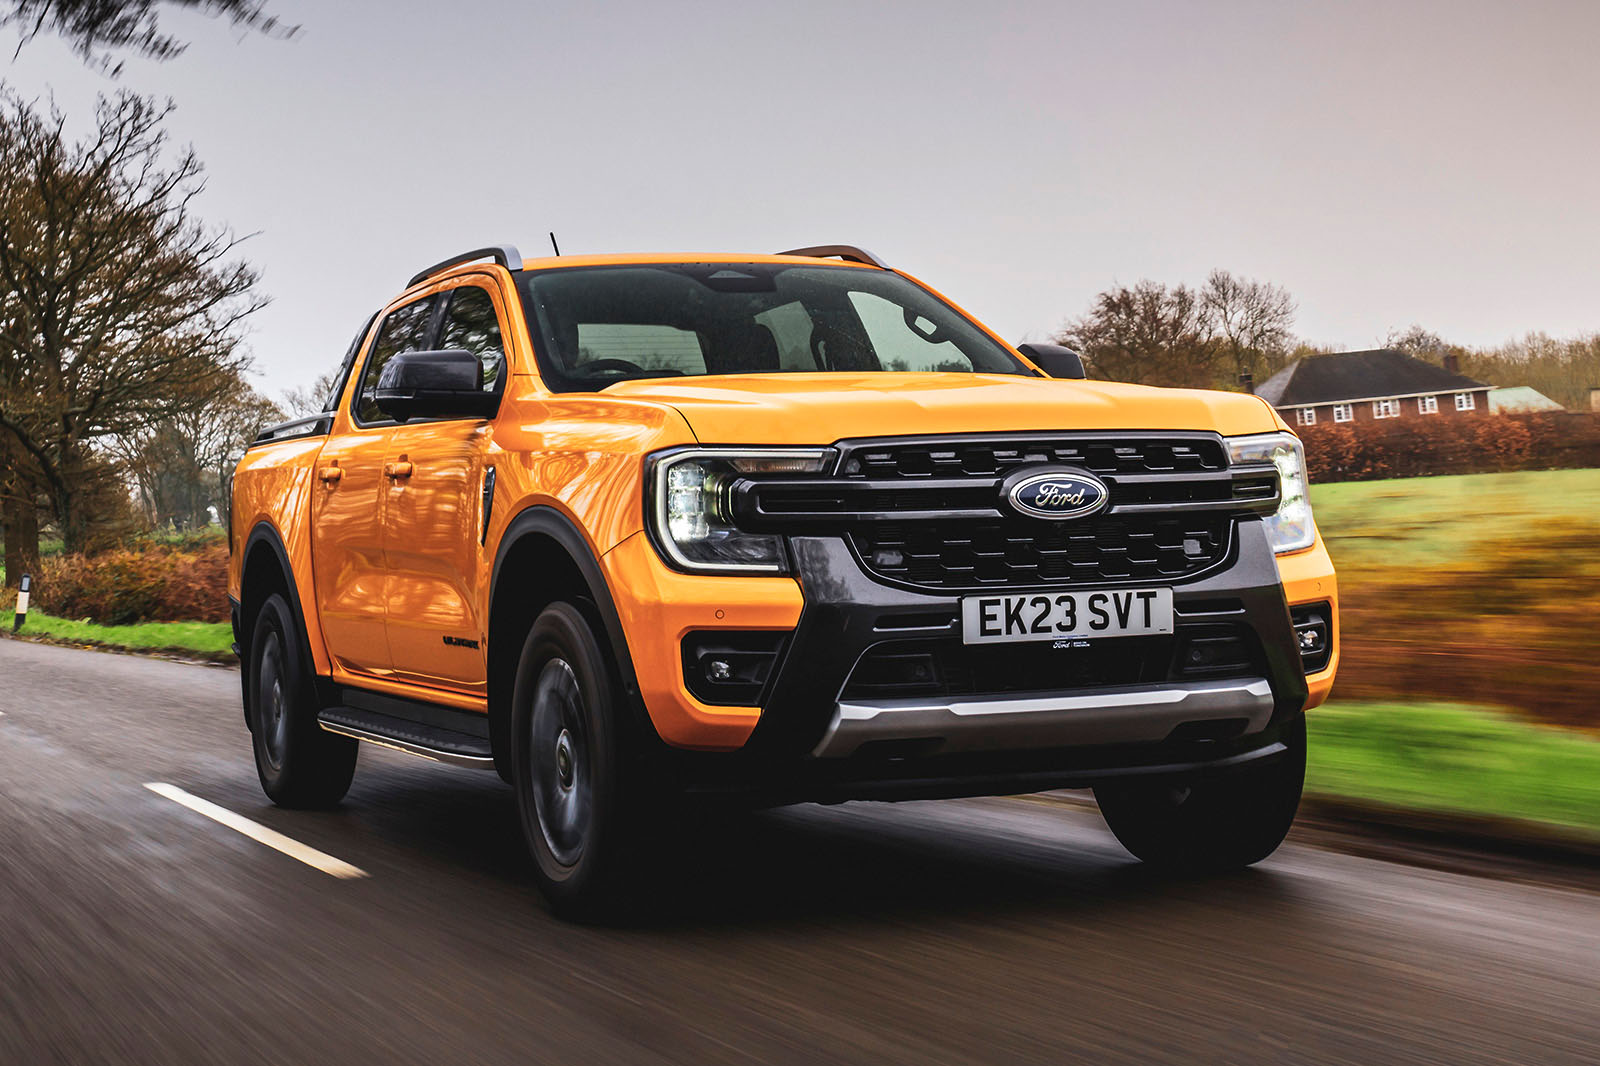 https://www.autocar.co.uk/sites/autocar.co.uk/files/images/car-reviews/first-drives/legacy/1-ford-ranger-top-10.jpg